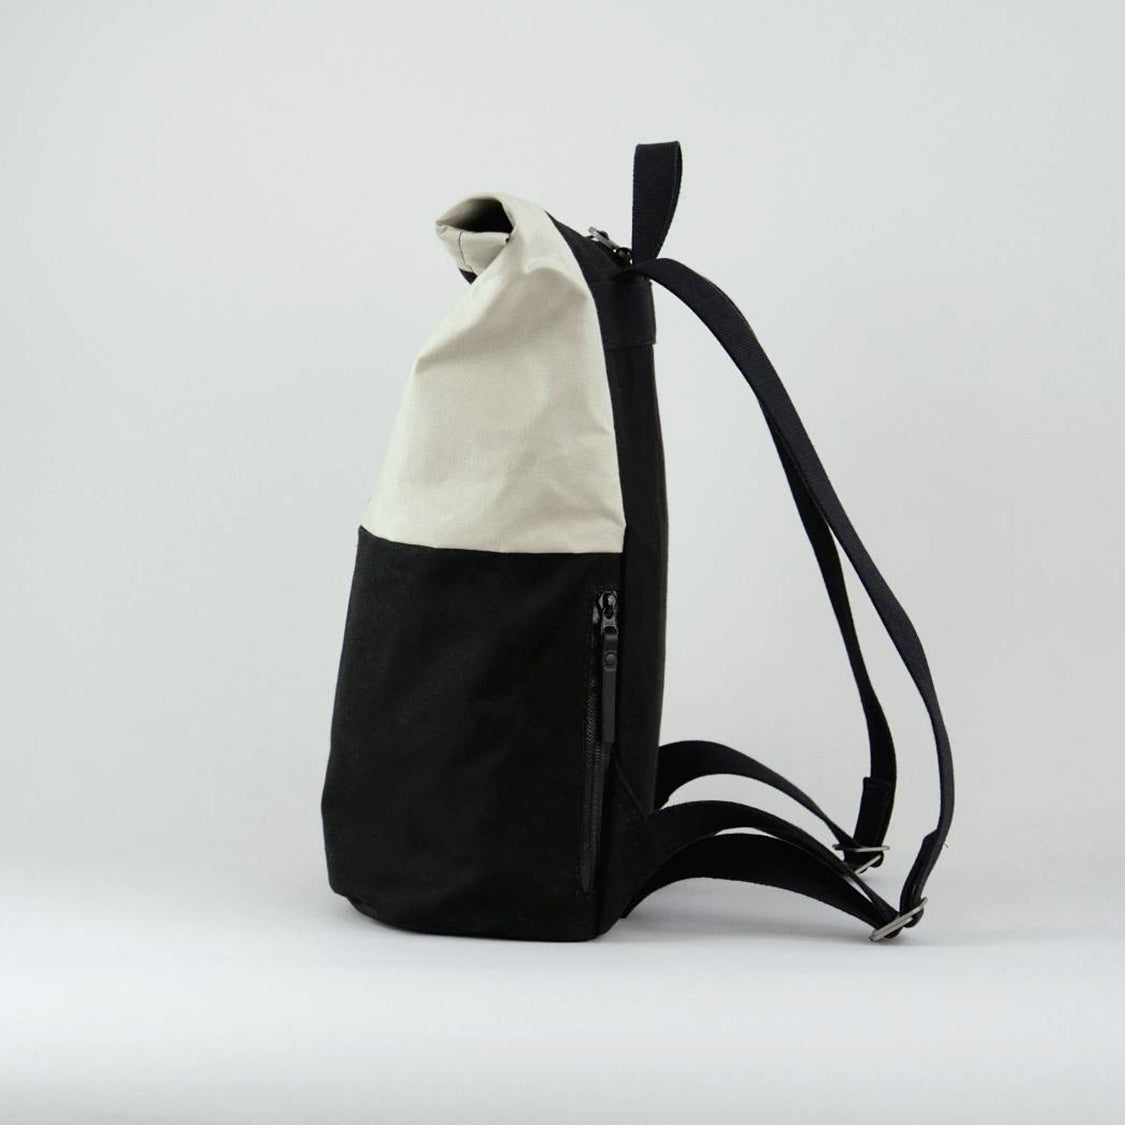 Side view of Max the backpack. A rolltop backpack made of waxed canvas in chalk white and black, with a side zipped pocket visible for storage of phone or keys.